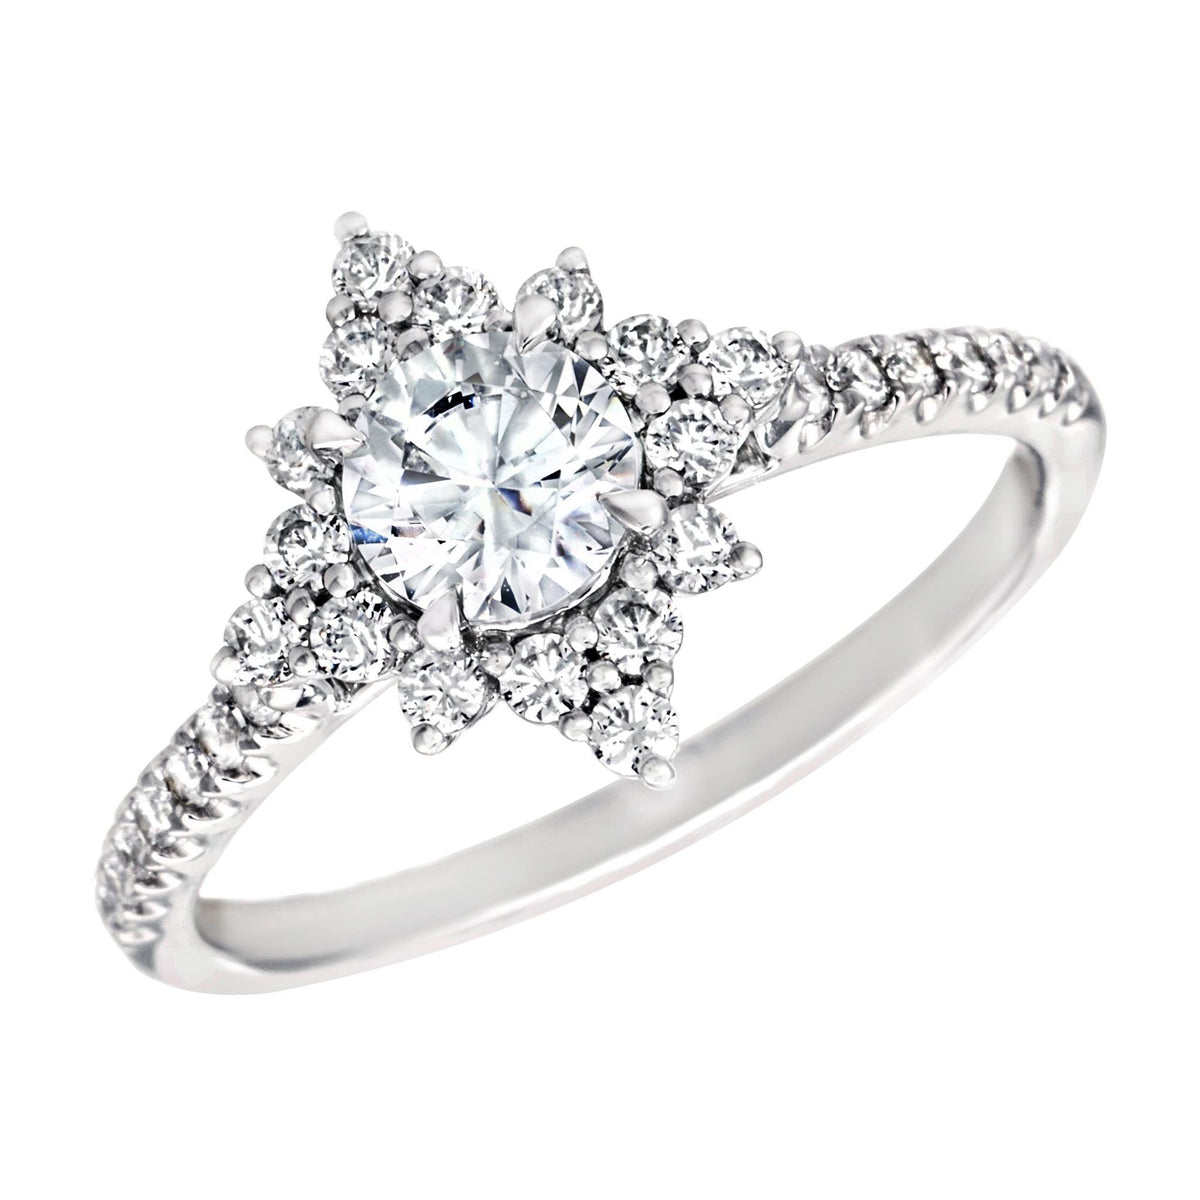 18Kt White Gold Halo Engagement Ring Mounting With 0.35cttw Natural Diamonds